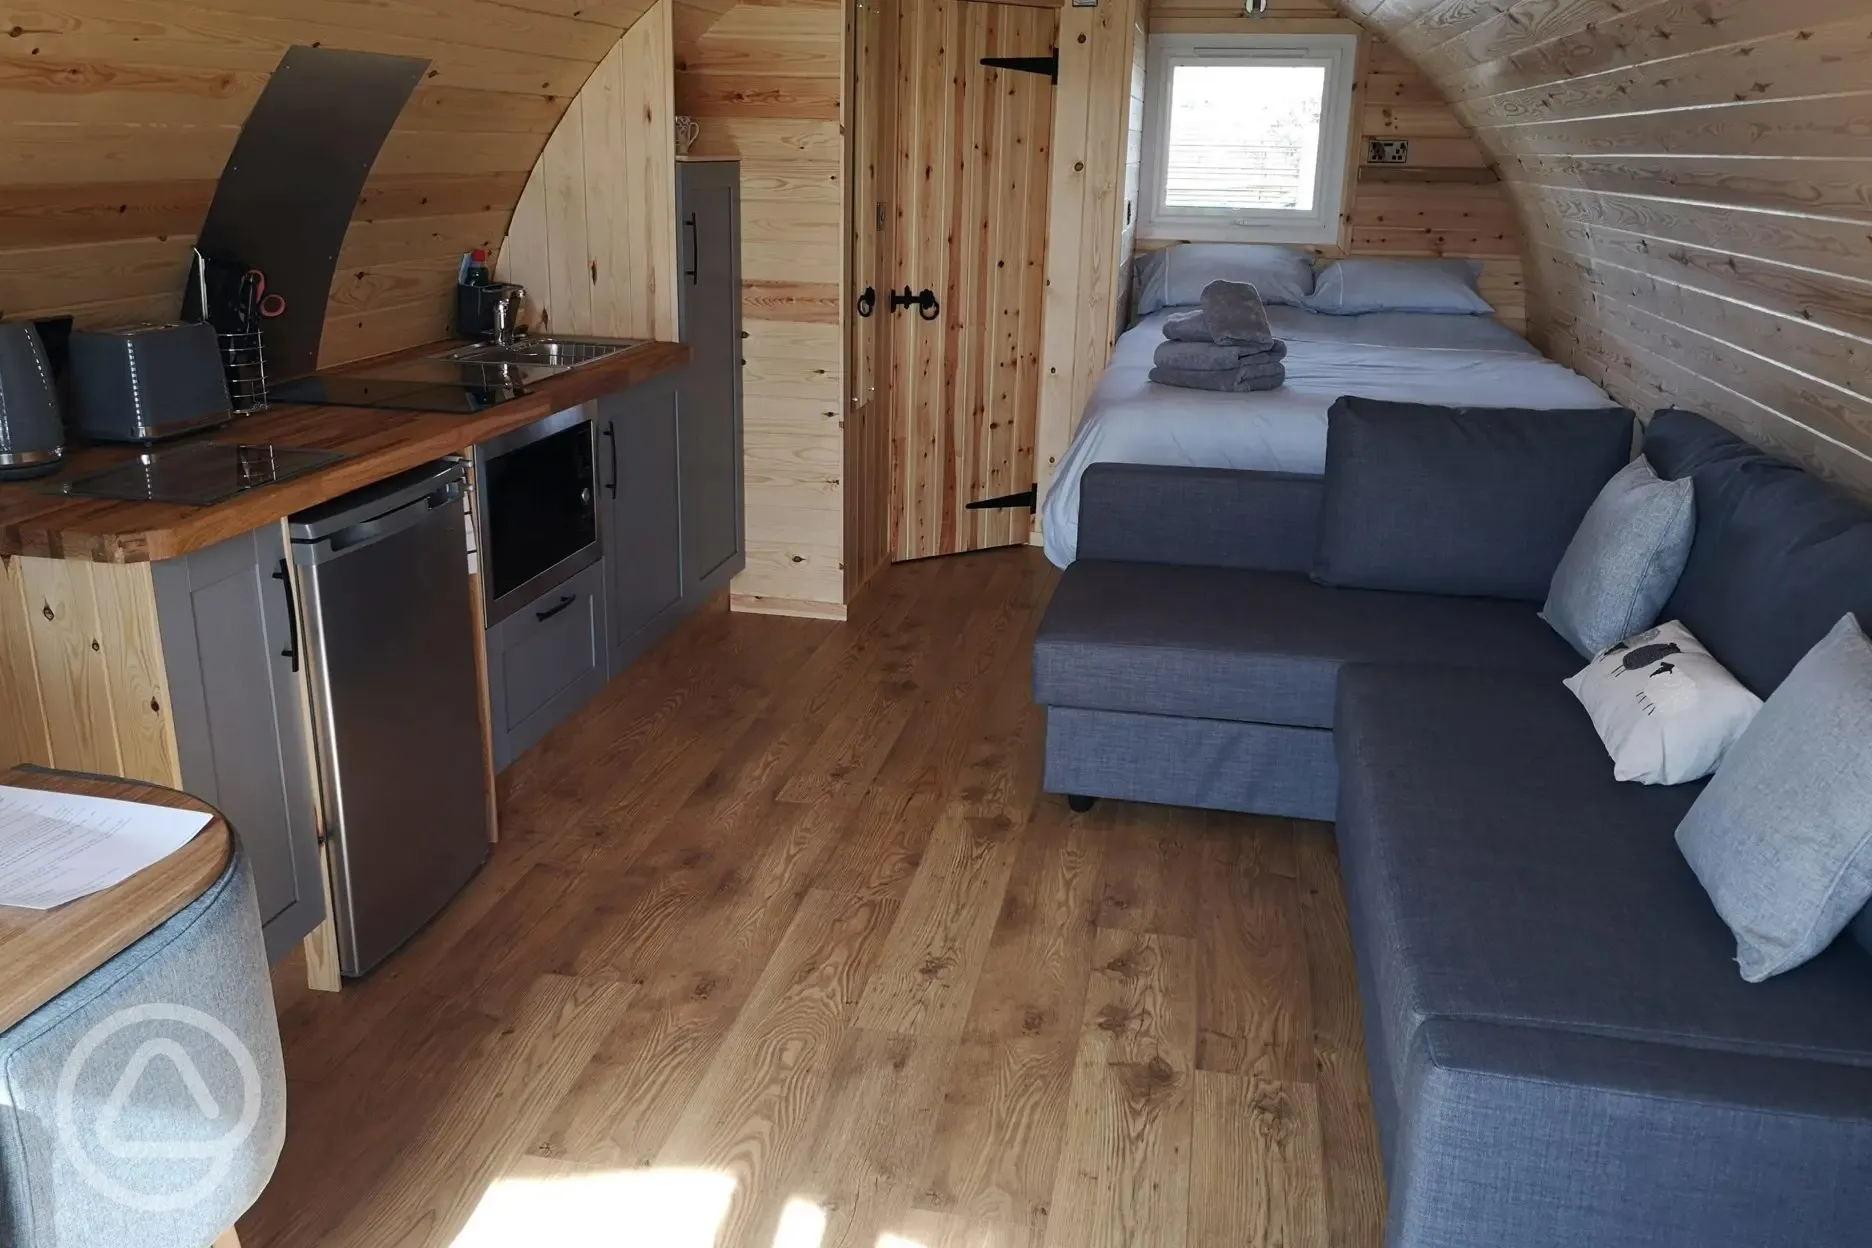 Secluded pod interior